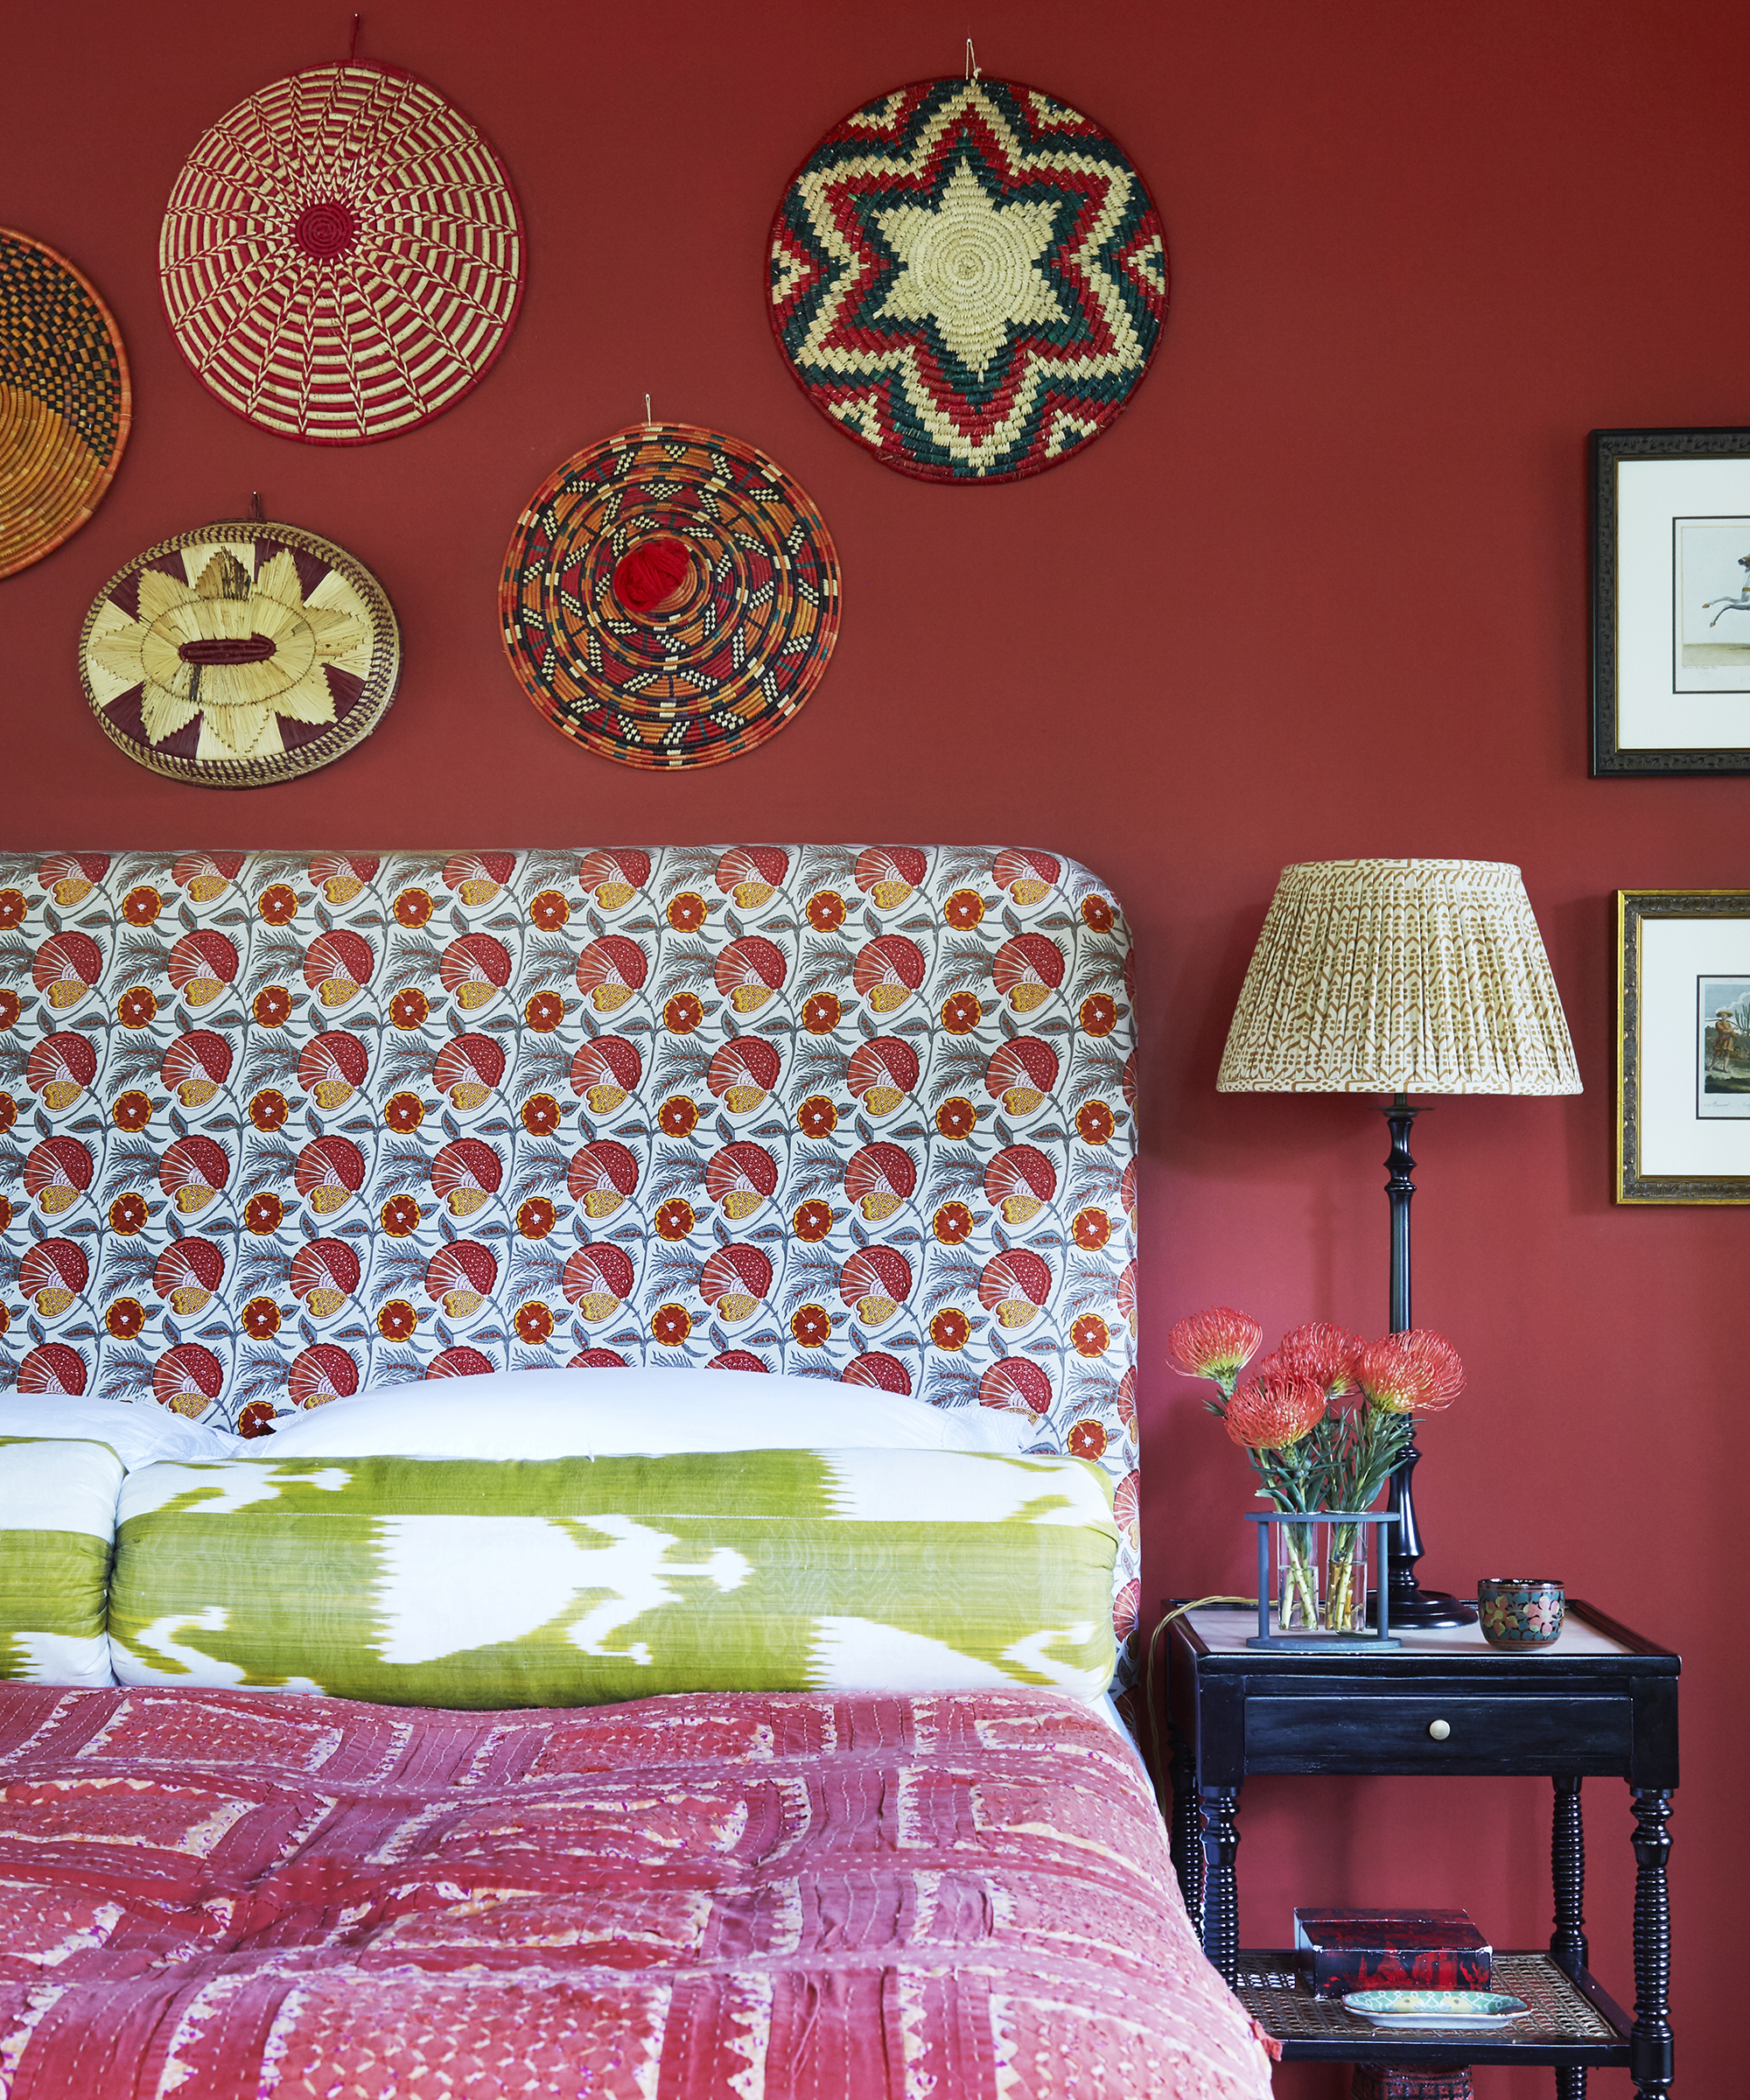 An example of bohemian bedroom ideas showing a bedroom with a red wall and a floral headboard with ikat prints and basketwork plates